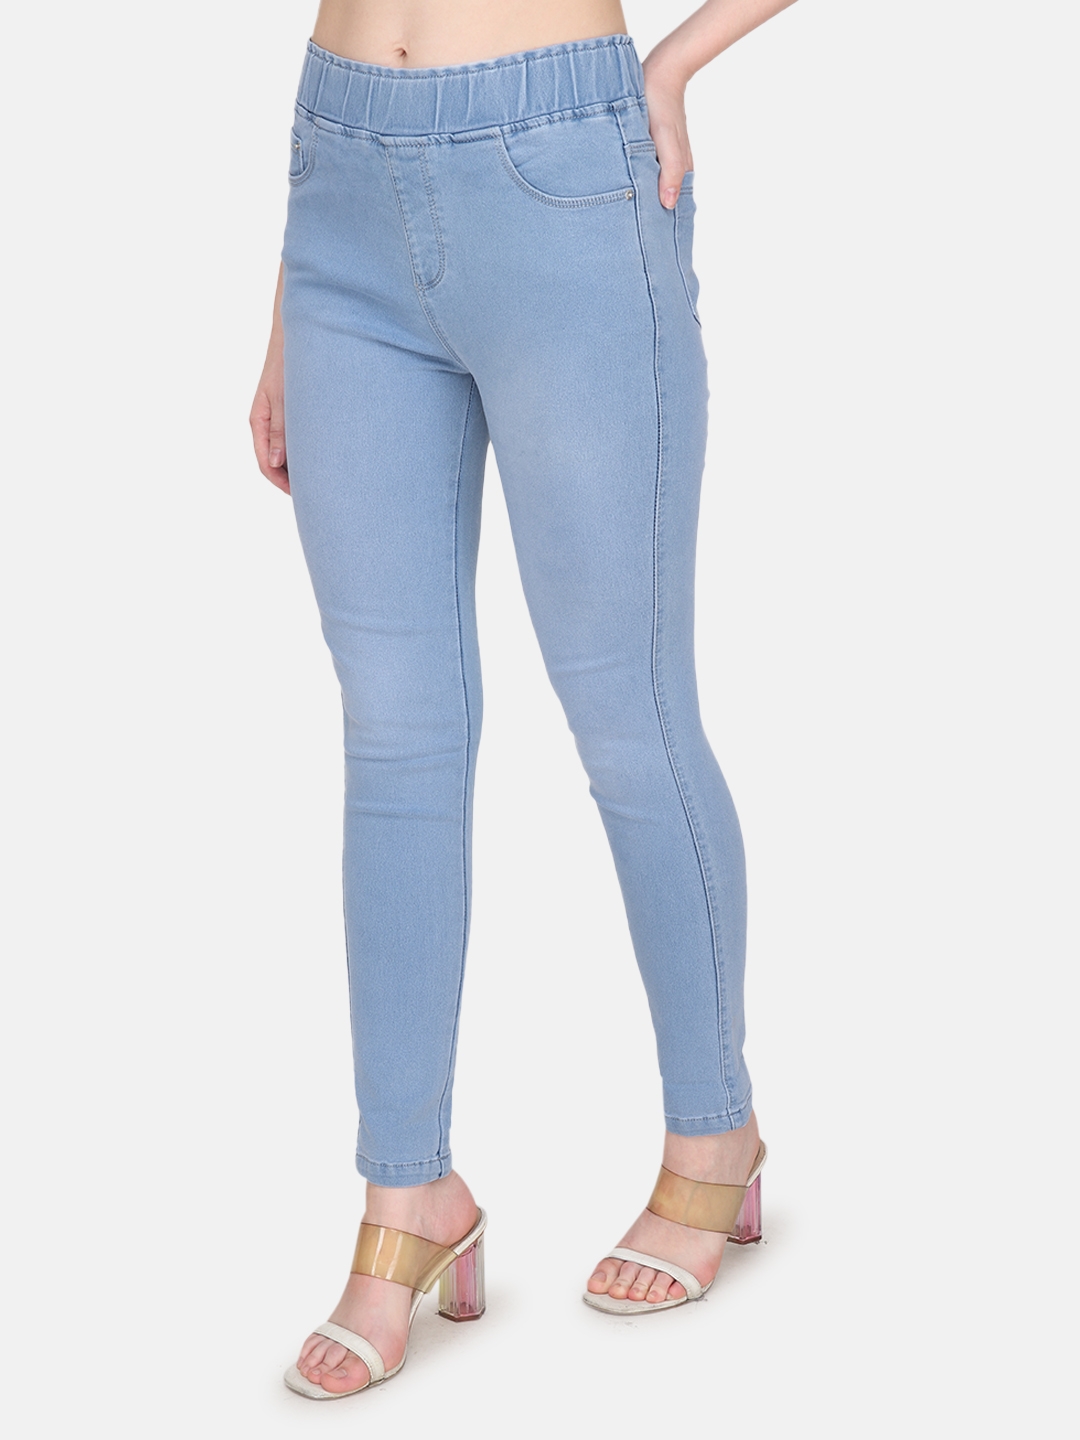 Albion | Albion By CnM Women Stretchable Light Blue Denim Jegging 1